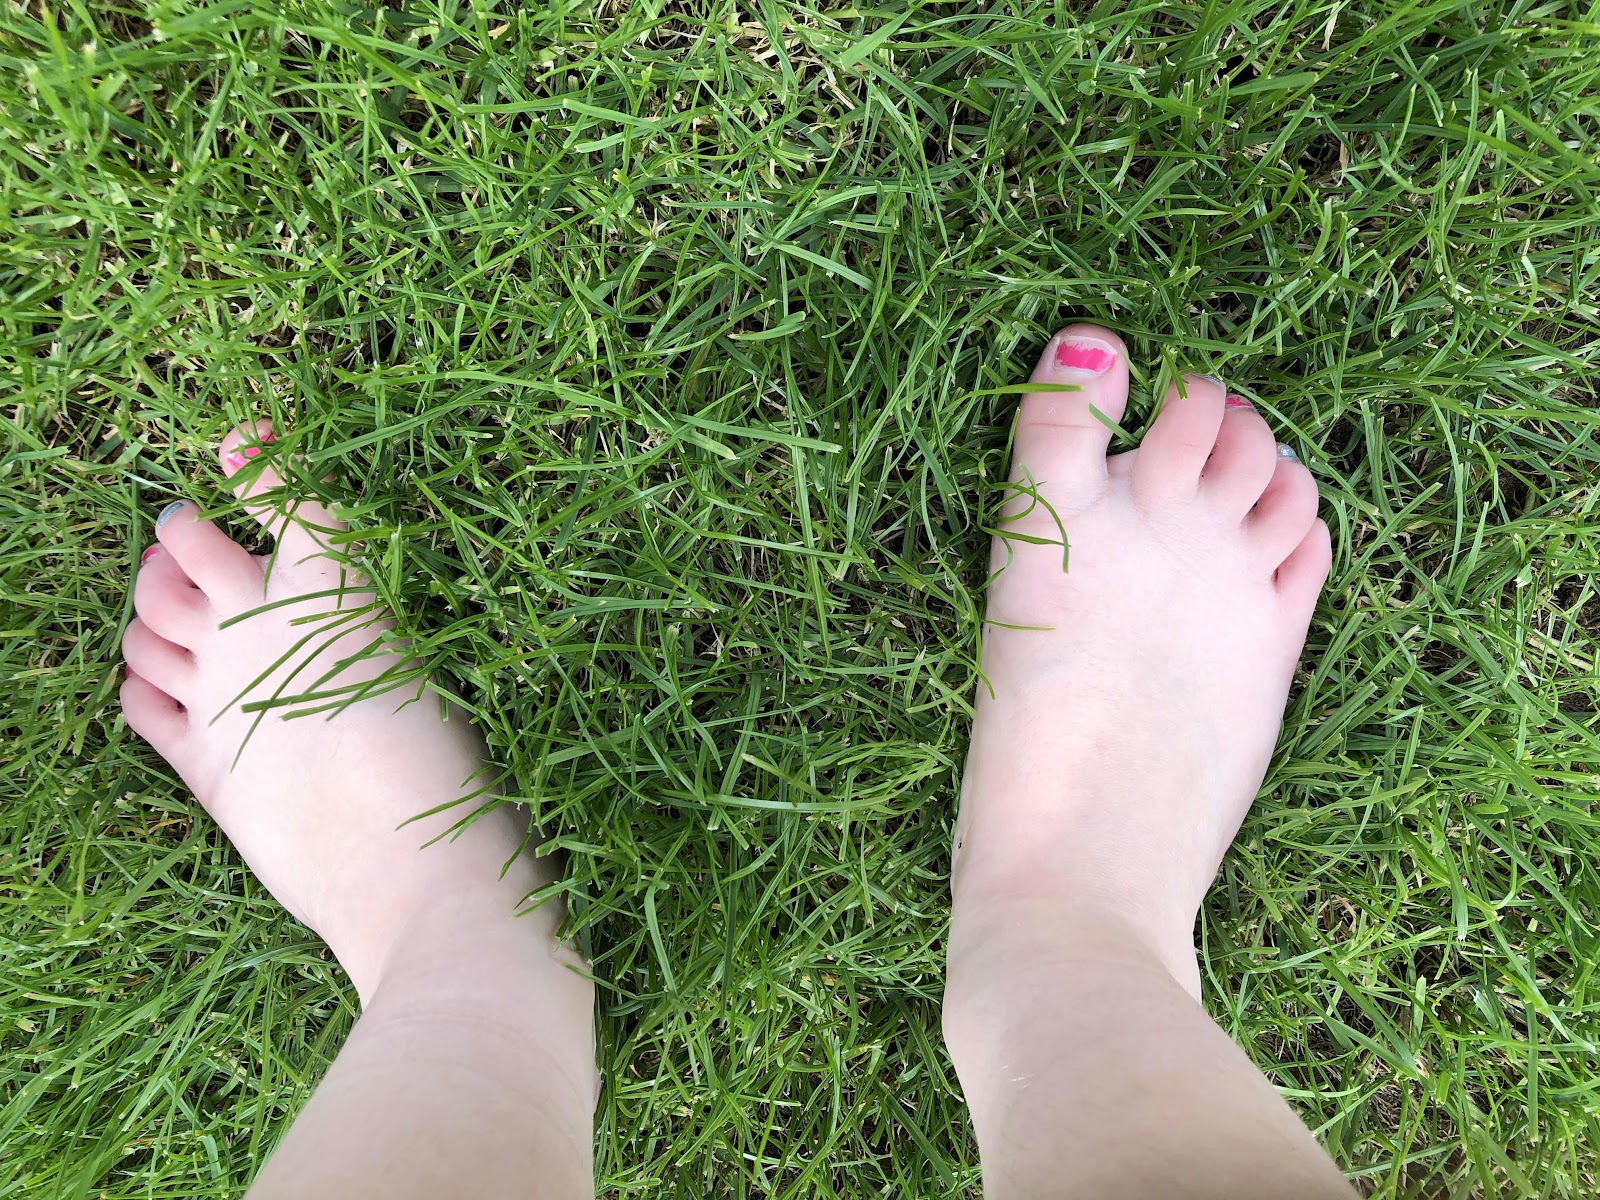 Barefoot in the grass